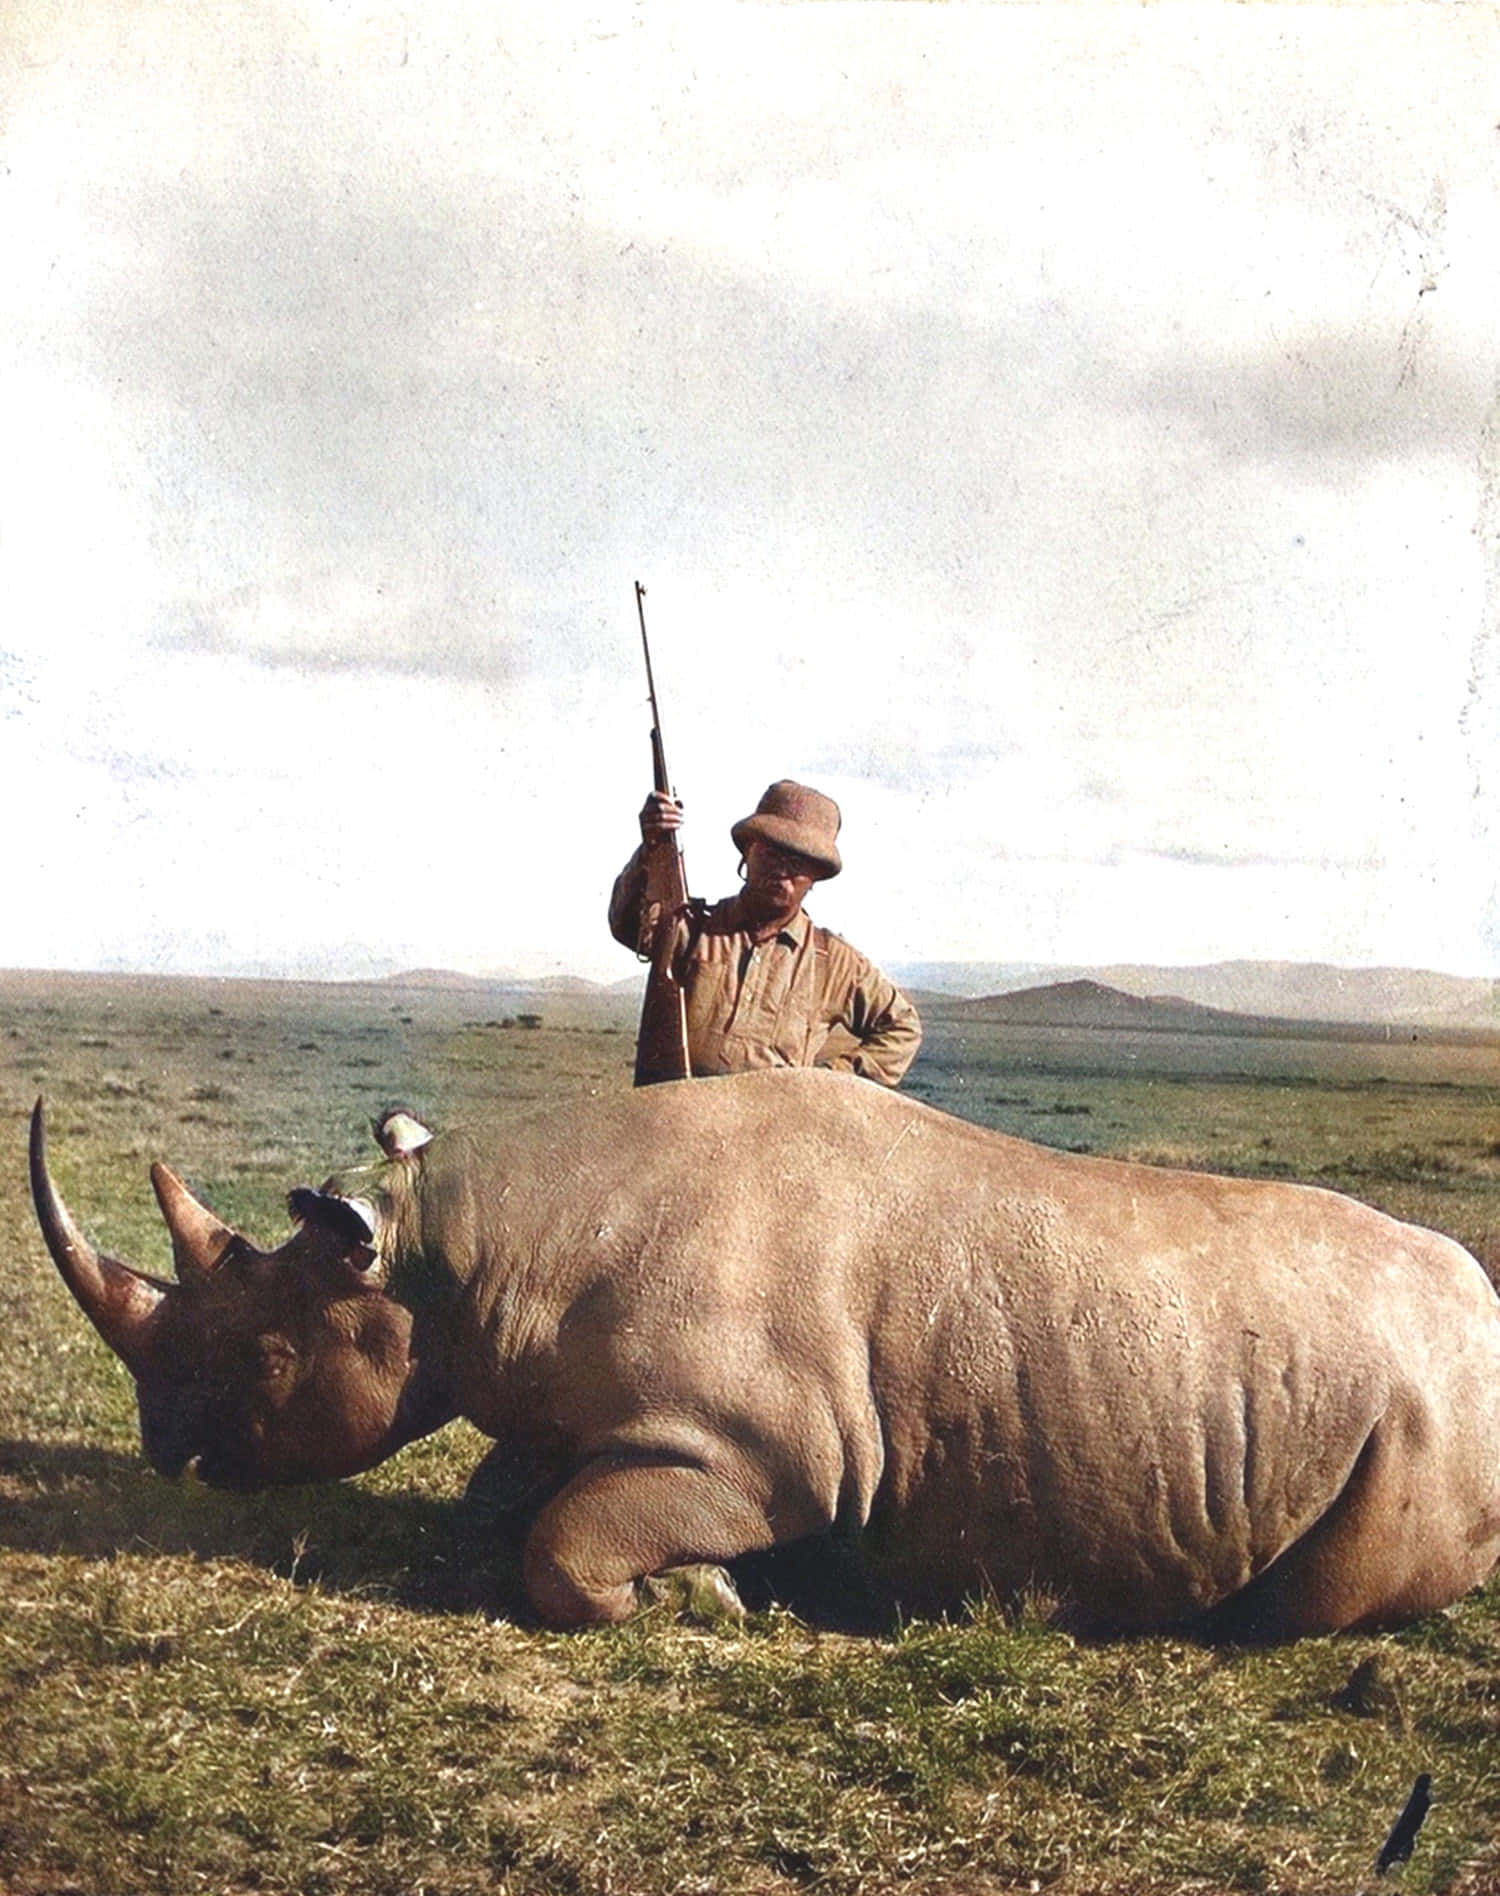 A rhino peacefully standing in the middle of a grassy plain.